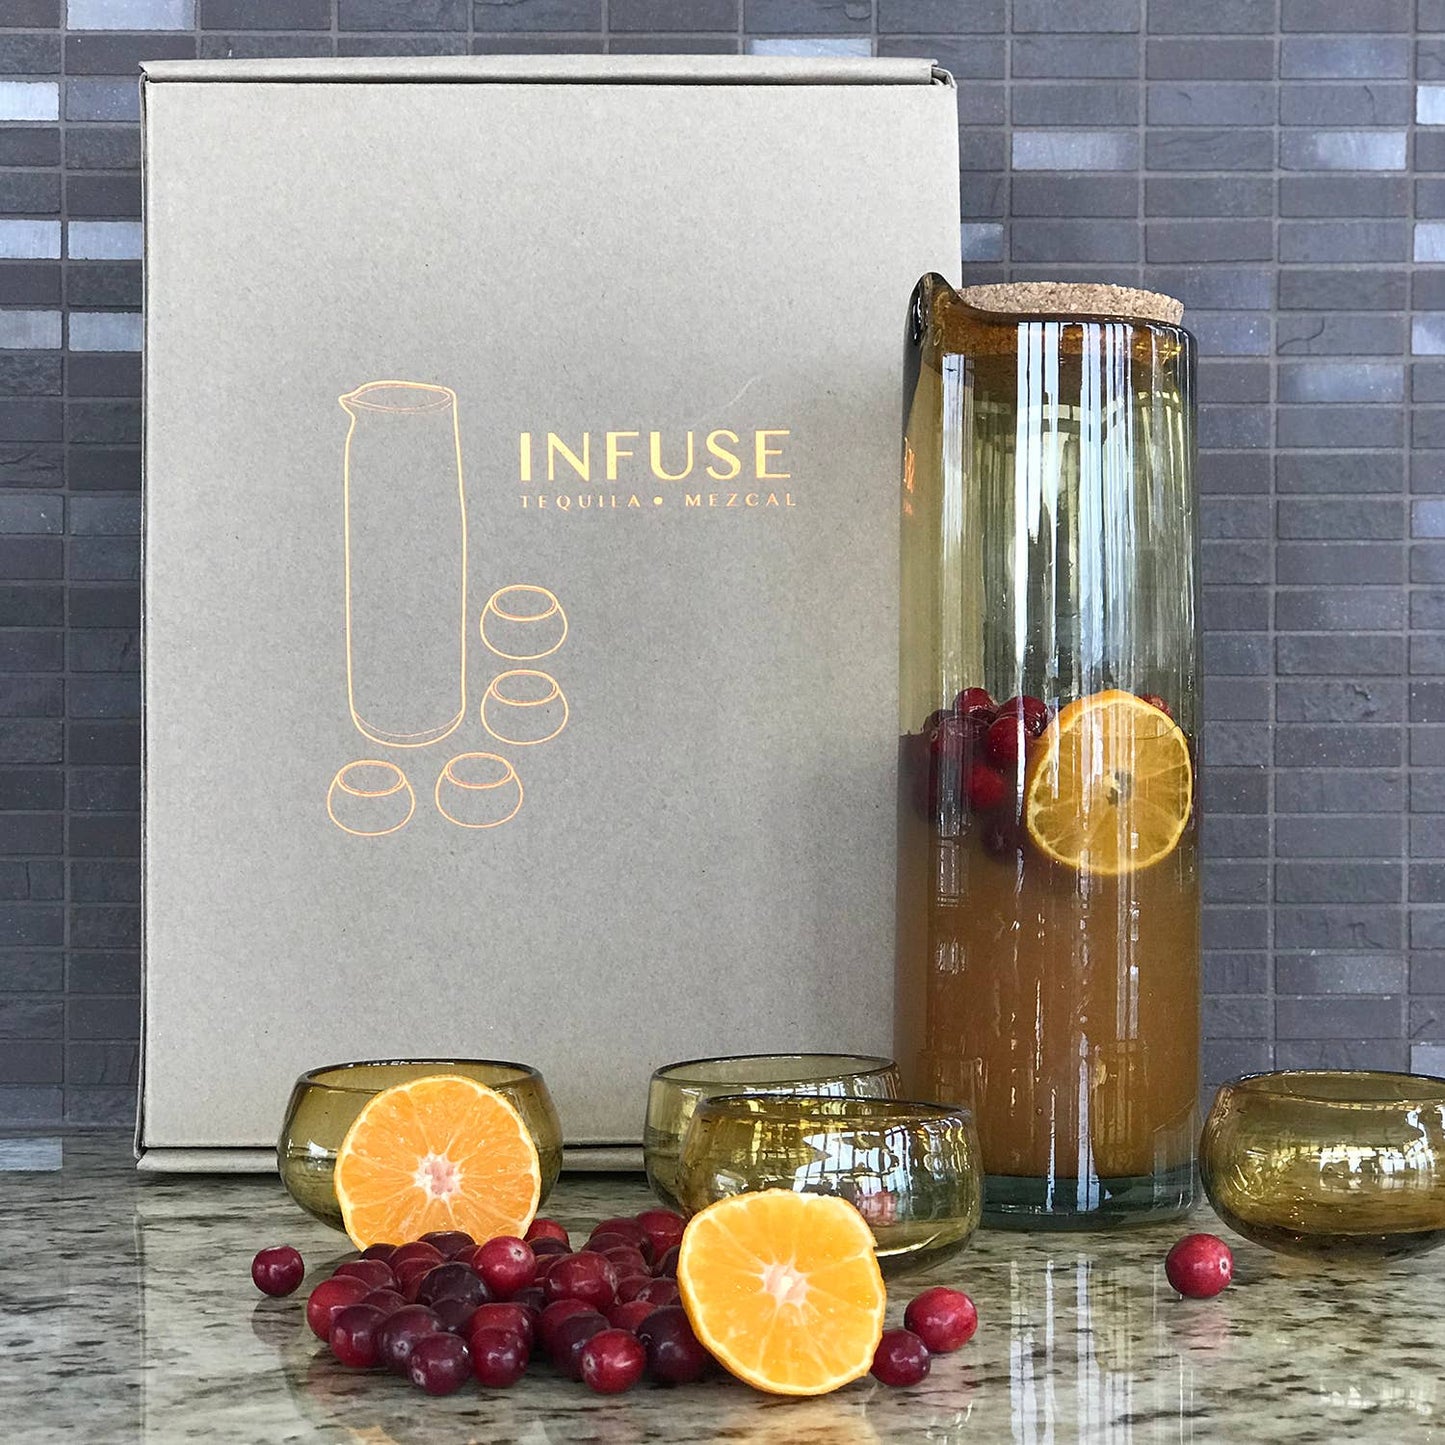 INFUSE - Mezcal & tequila infusion and tasting kit